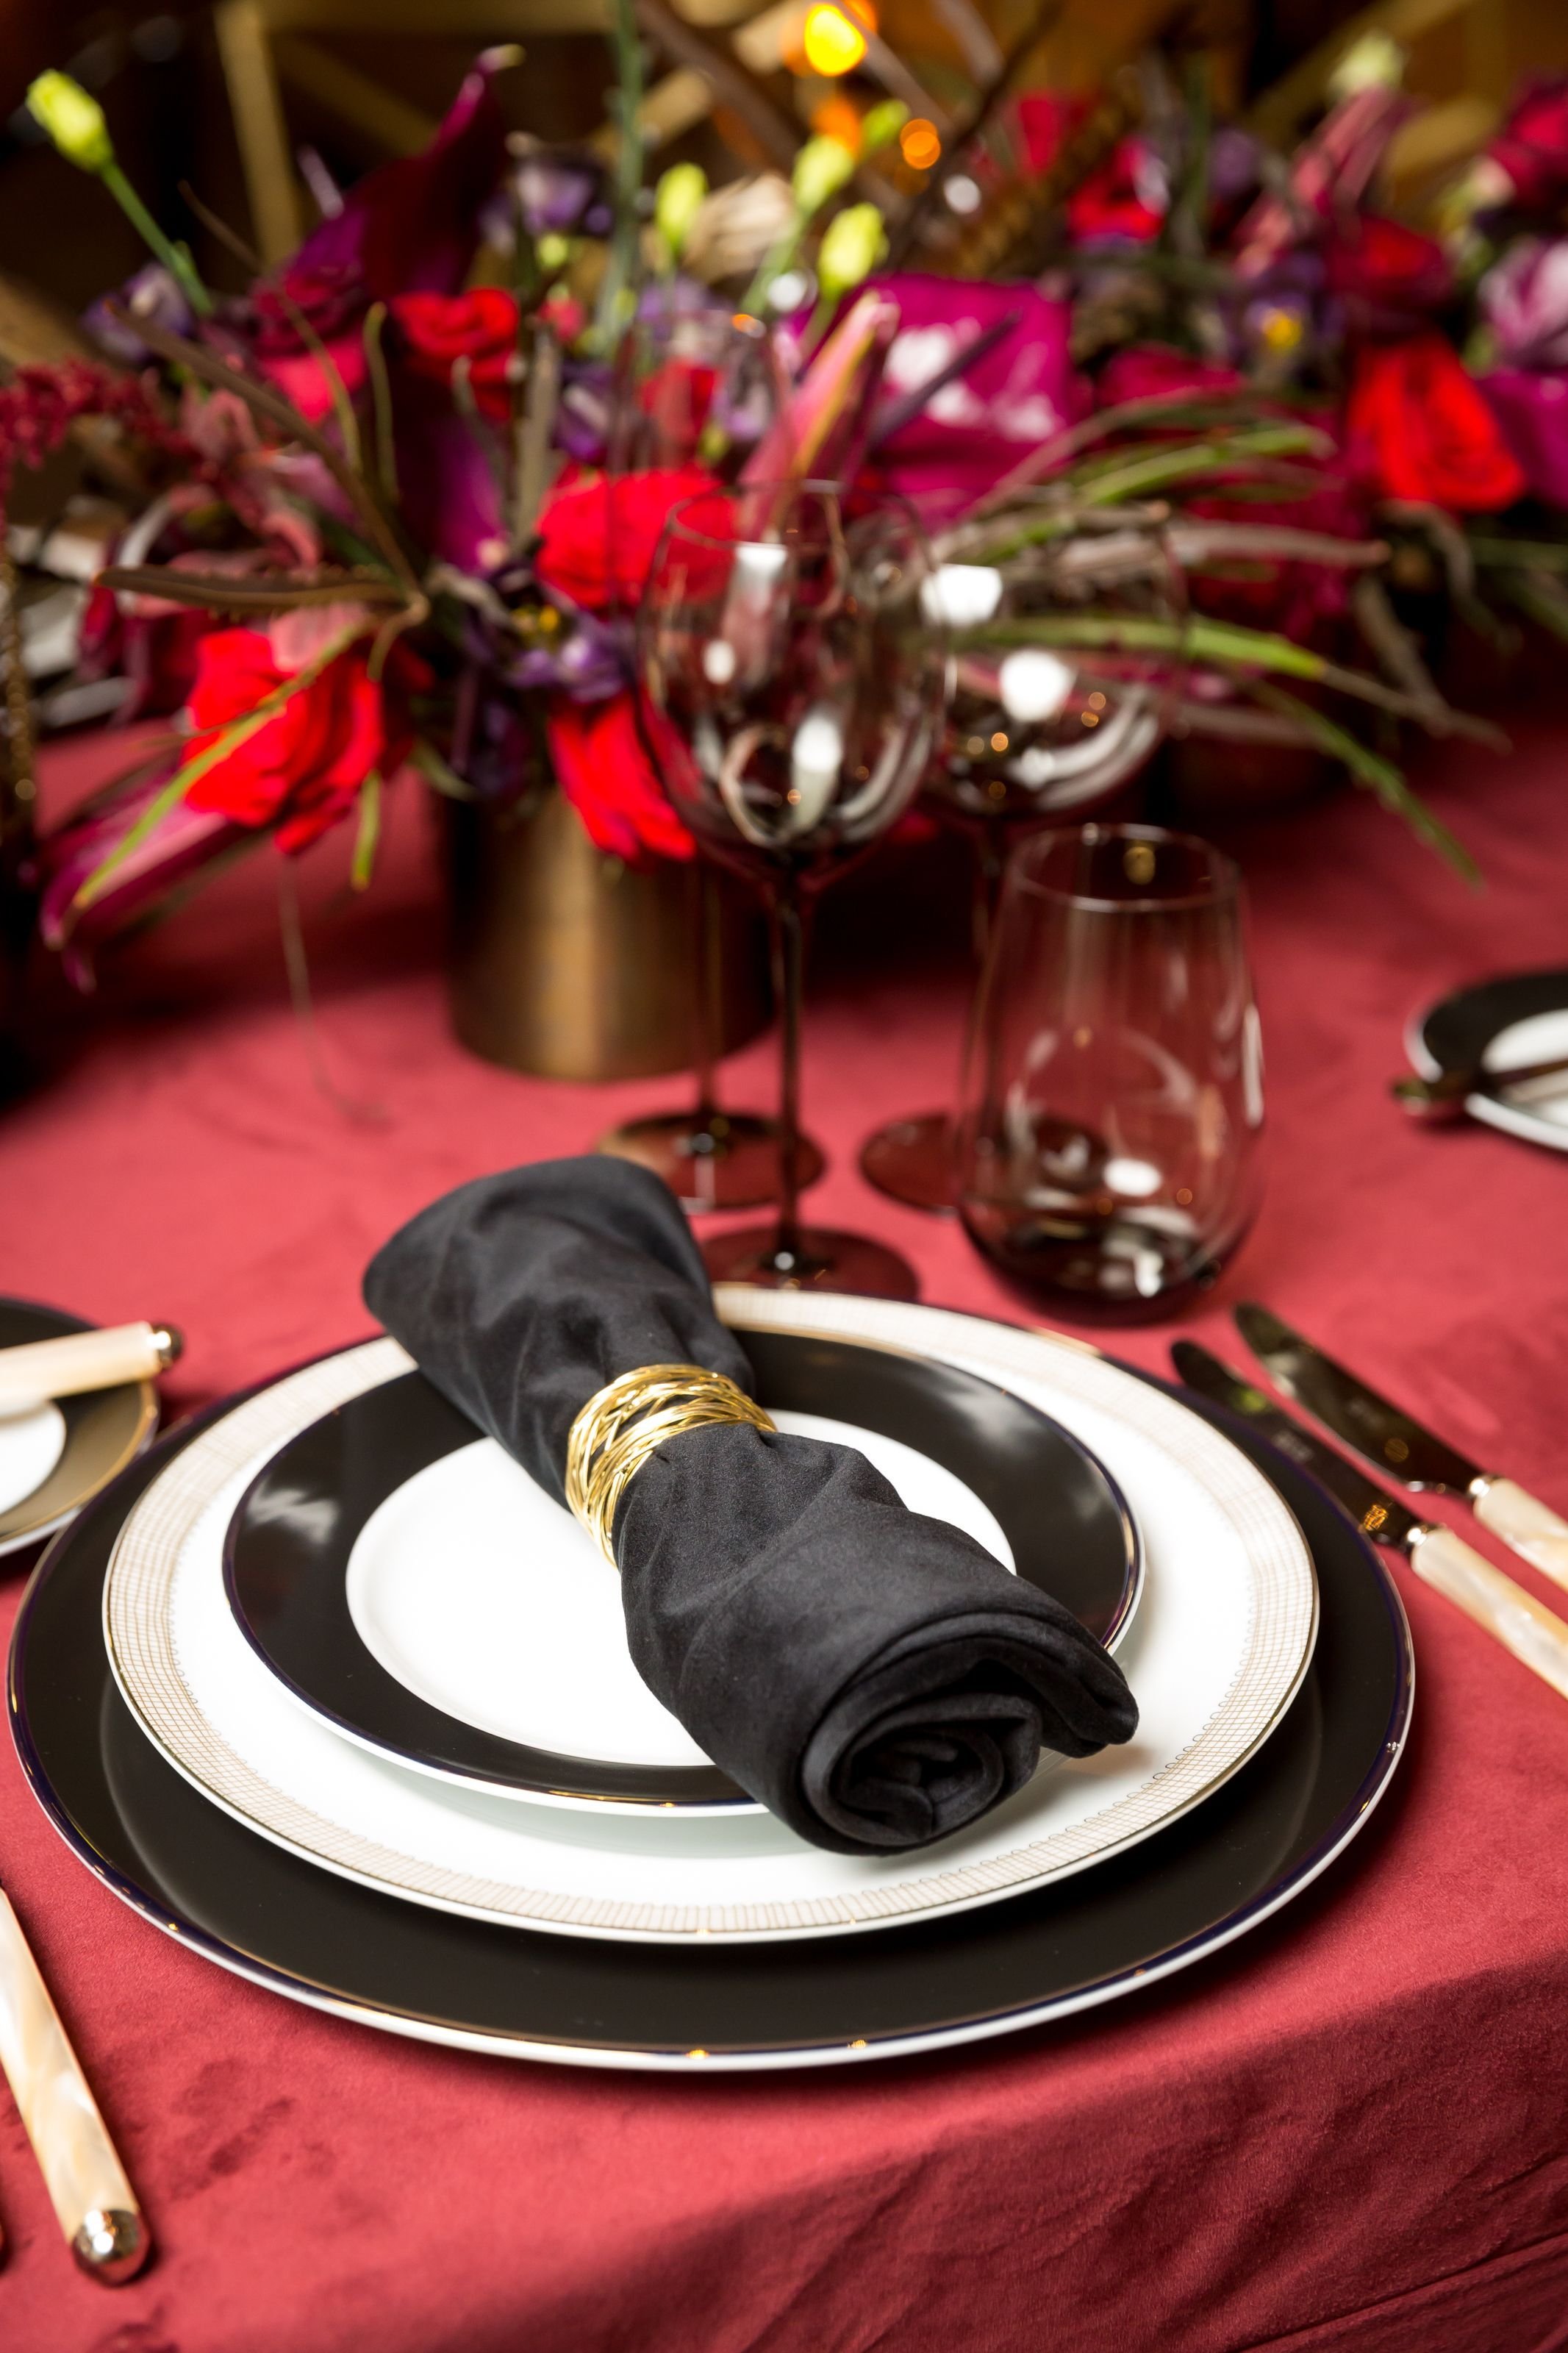 www.santabarbarawedding.com | Bright Event Rentals | Vanity Portrait Studio | Place Setting with Black and White Plates, a Black Napkin, and Glasses on a Red Tablecloth 